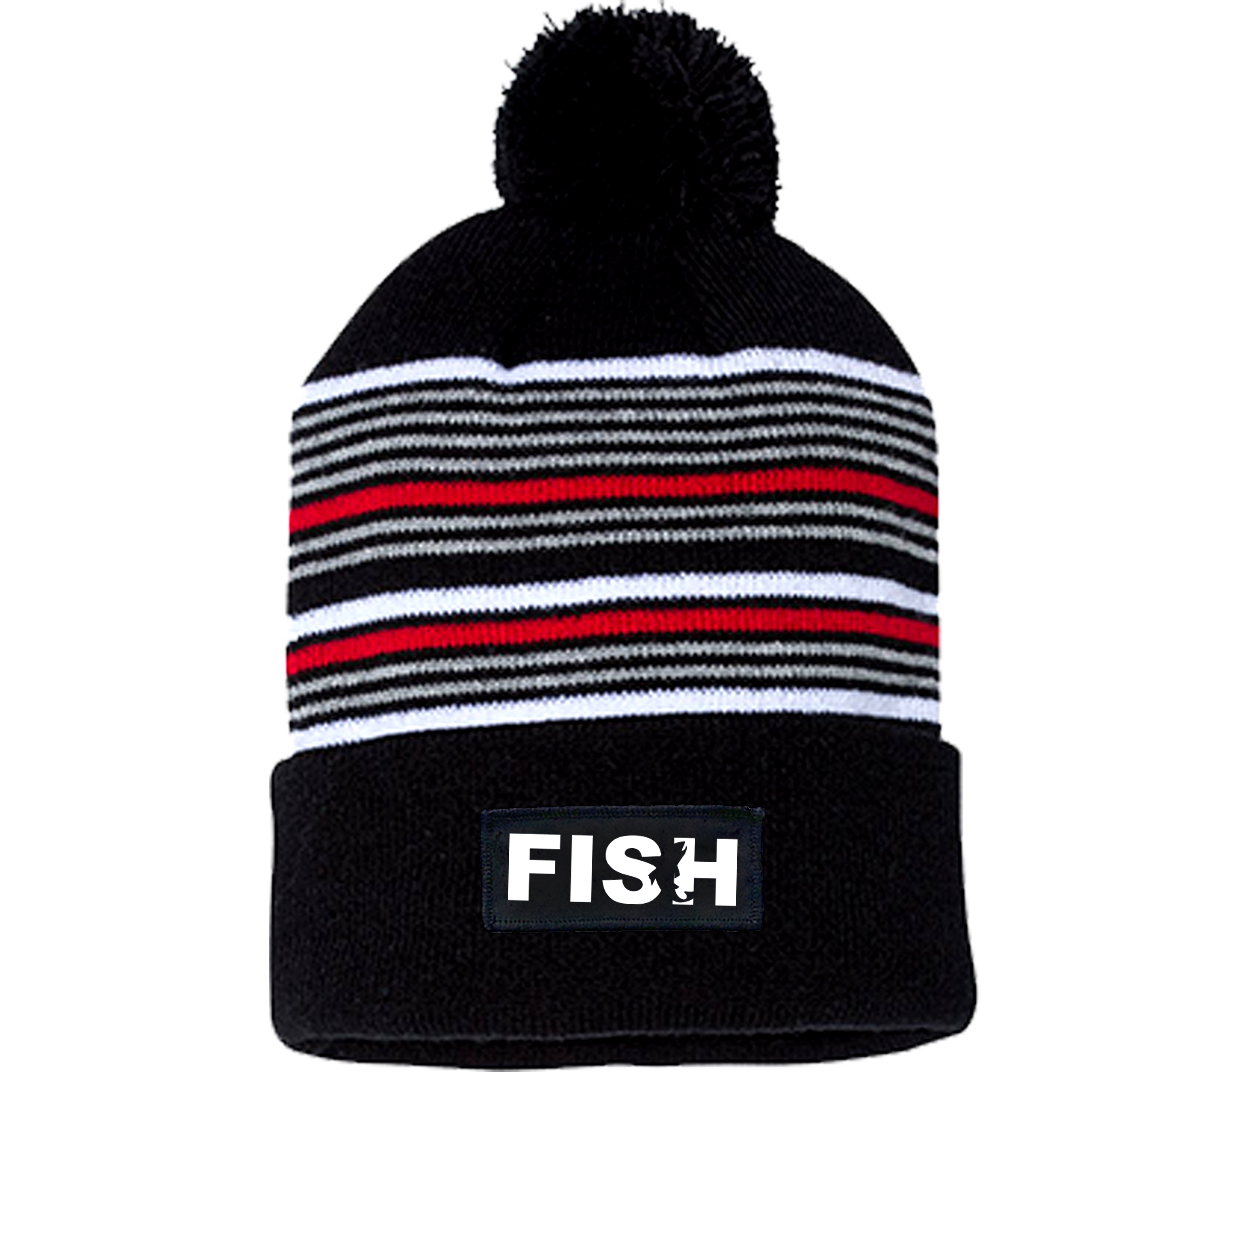 Fish Catch Logo Night Out Woven Patch Roll Up Pom Knit Beanie Black/ White/ Grey/ Red Beanie (White Logo)